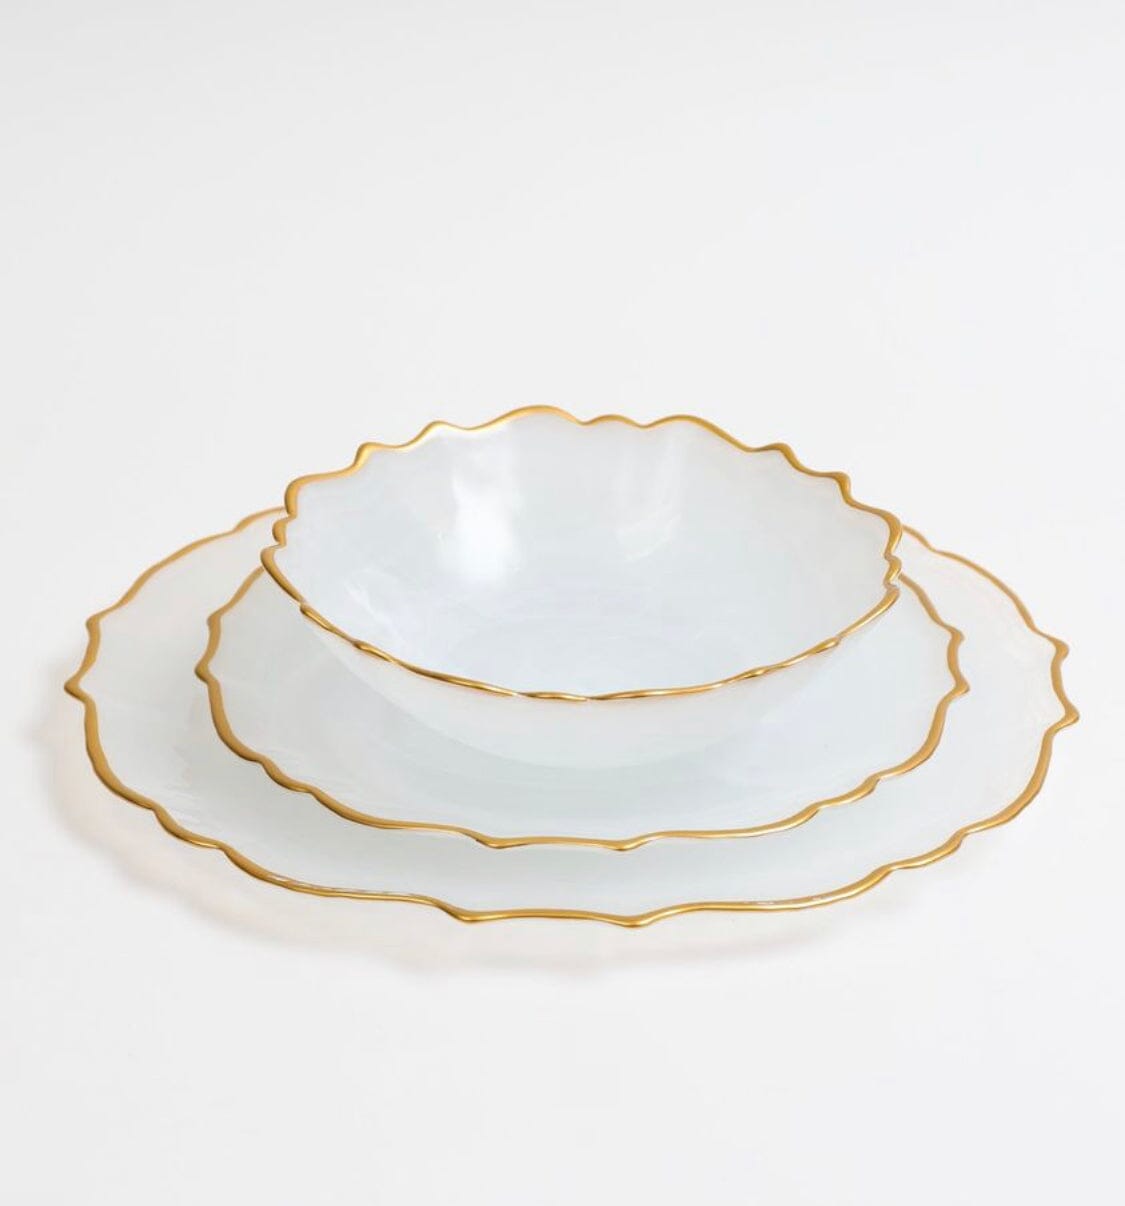 Small Bowl - Alabaster White Bowl Plate High Class Touch - Home Decor 